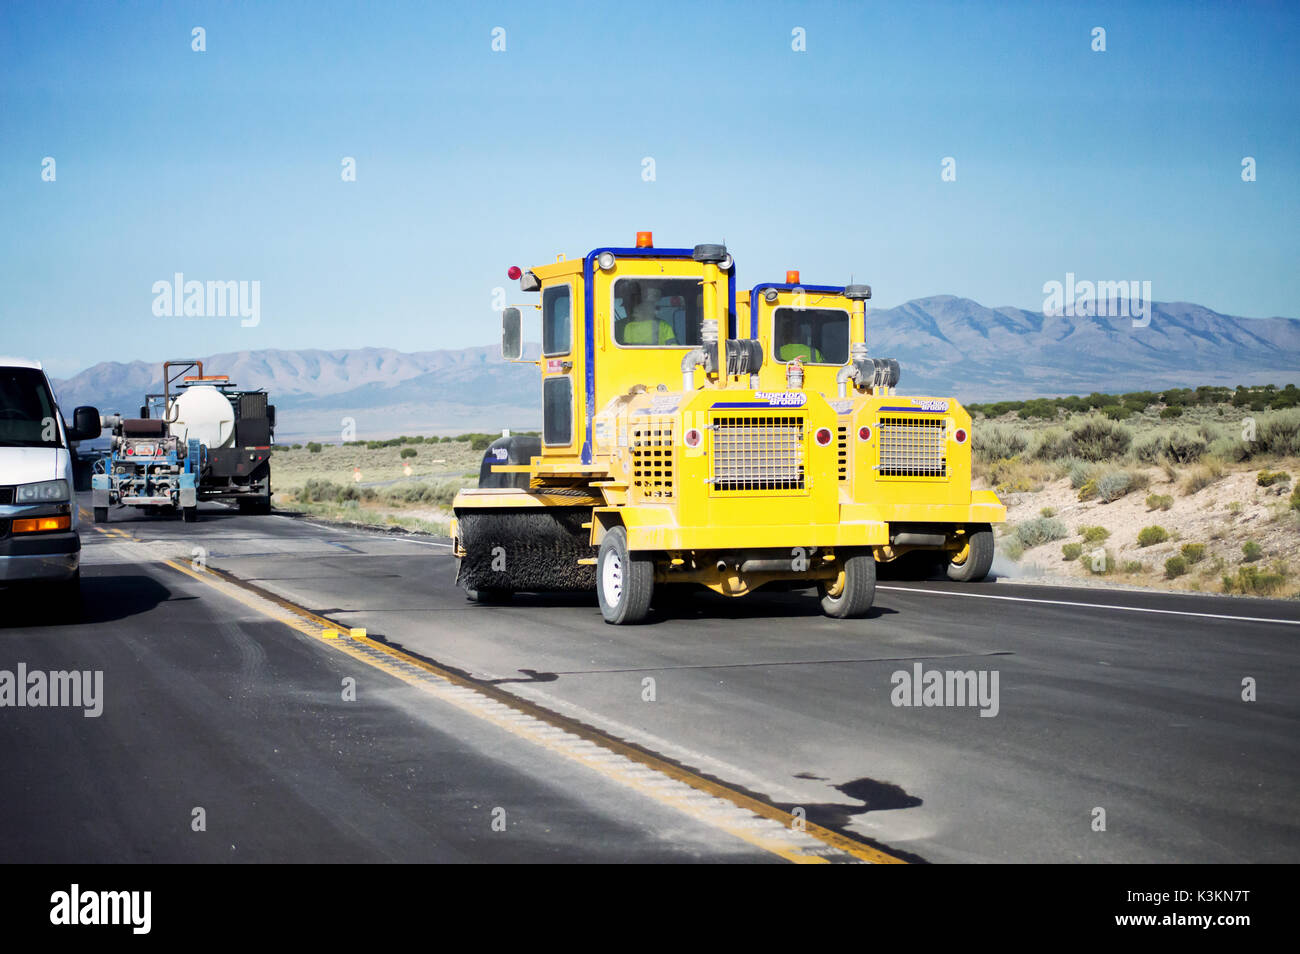 Two yellow street sweepers cleaning a road in the desert for resurfacing. Stock Photo